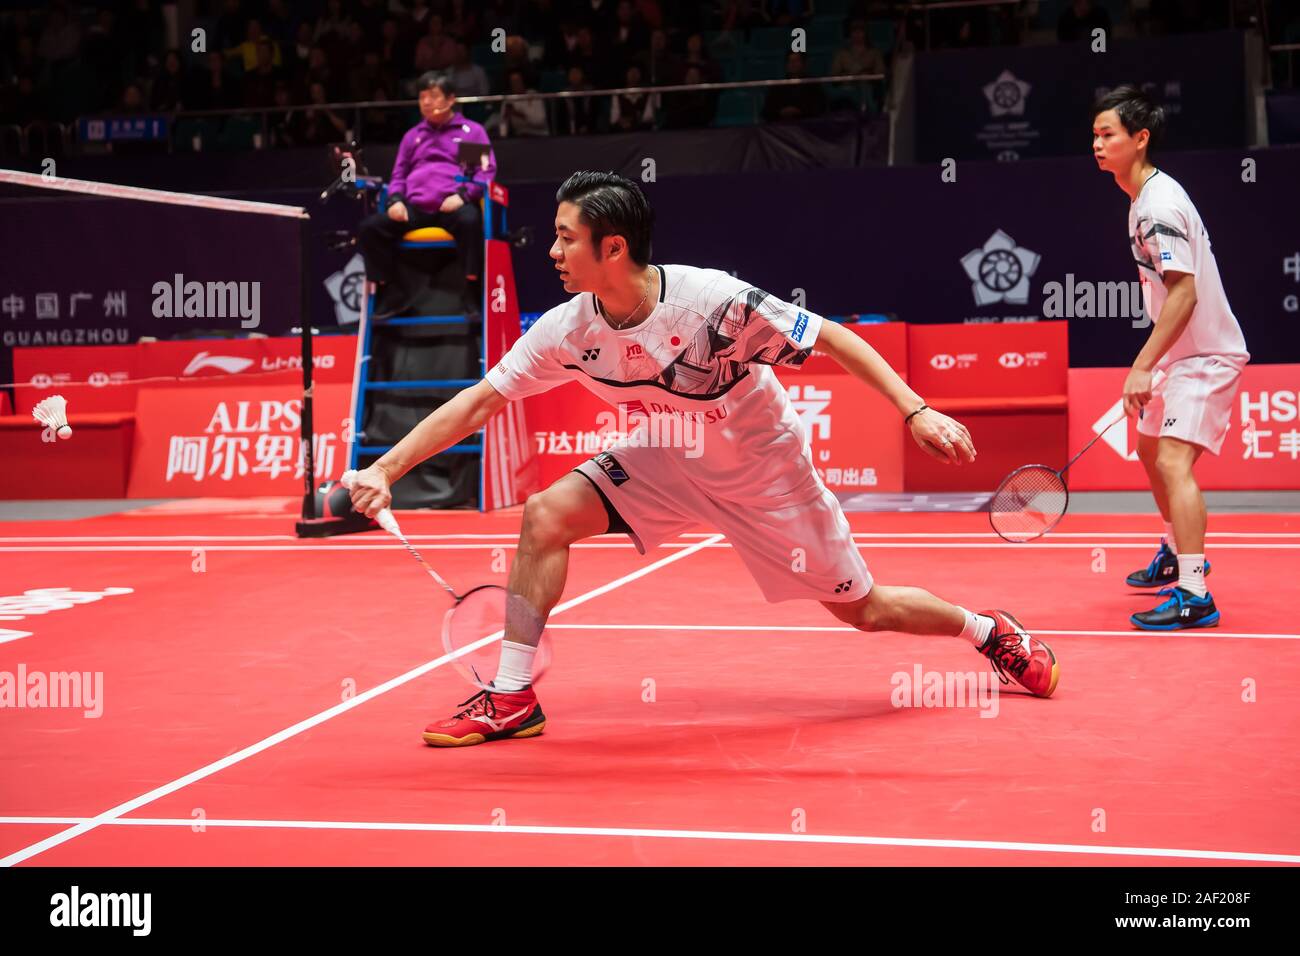 Japanese professional badminton players Hiroyuki Endo and Yuta Watanabe compete against Japanese professional badminton players Keigo Sonoda and Takeshi Kamura at the group stage of mens doubles at HSBC BWF World Tour